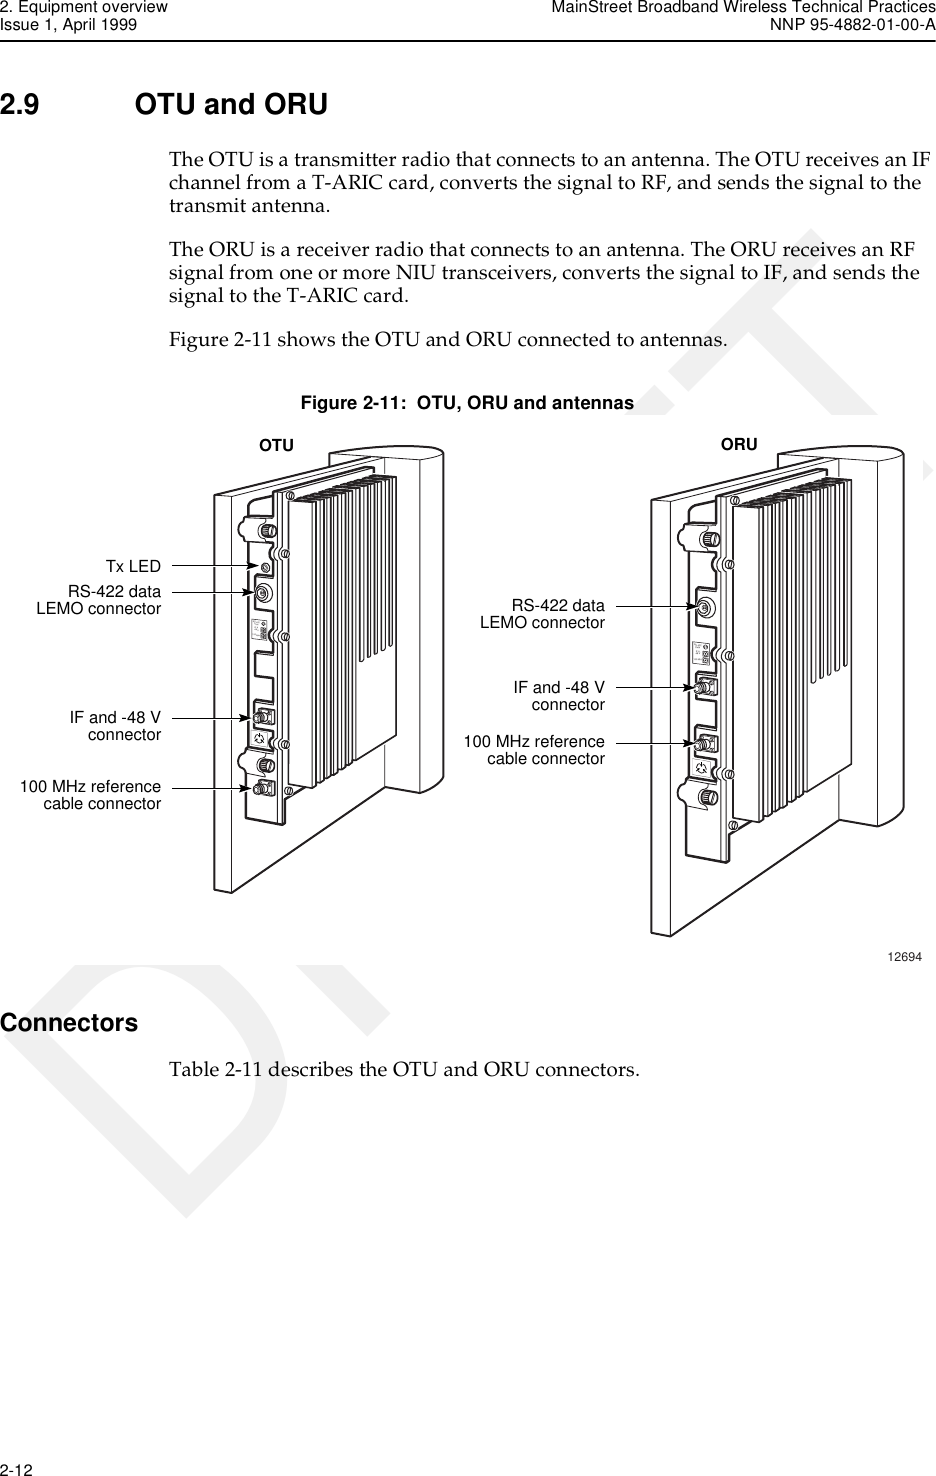 2. Equipment overview MainStreet Broadband Wireless Technical PracticesIssue 1, April 1999 NNP 95-4882-01-00-A2-12   DRAFT2.9 OTU and ORUThe OTU is a transmitter radio that connects to an antenna. The OTU receives an IF channel from a T-ARIC card, converts the signal to RF, and sends the signal to the transmit antenna.The ORU is a receiver radio that connects to an antenna. The ORU receives an RF signal from one or more NIU transceivers, converts the signal to IF, and sends the signal to the T-ARIC card.Figure 2-11 shows the OTU and ORU connected to antennas.Figure 2-11:  OTU, ORU and antennasConnectorsTable 2-11 describes the OTU and ORU connectors.12694100 MhzIF &amp;-48 VRS-422Data100 MhzIF &amp;-48 VRS-422DataOTUTx LEDIF and -48 Vconnector100 MHz referencecable connectorRS-422 dataLEMO connectorORUIF and -48 Vconnector100 MHz referencecable connectorRS-422 dataLEMO connector